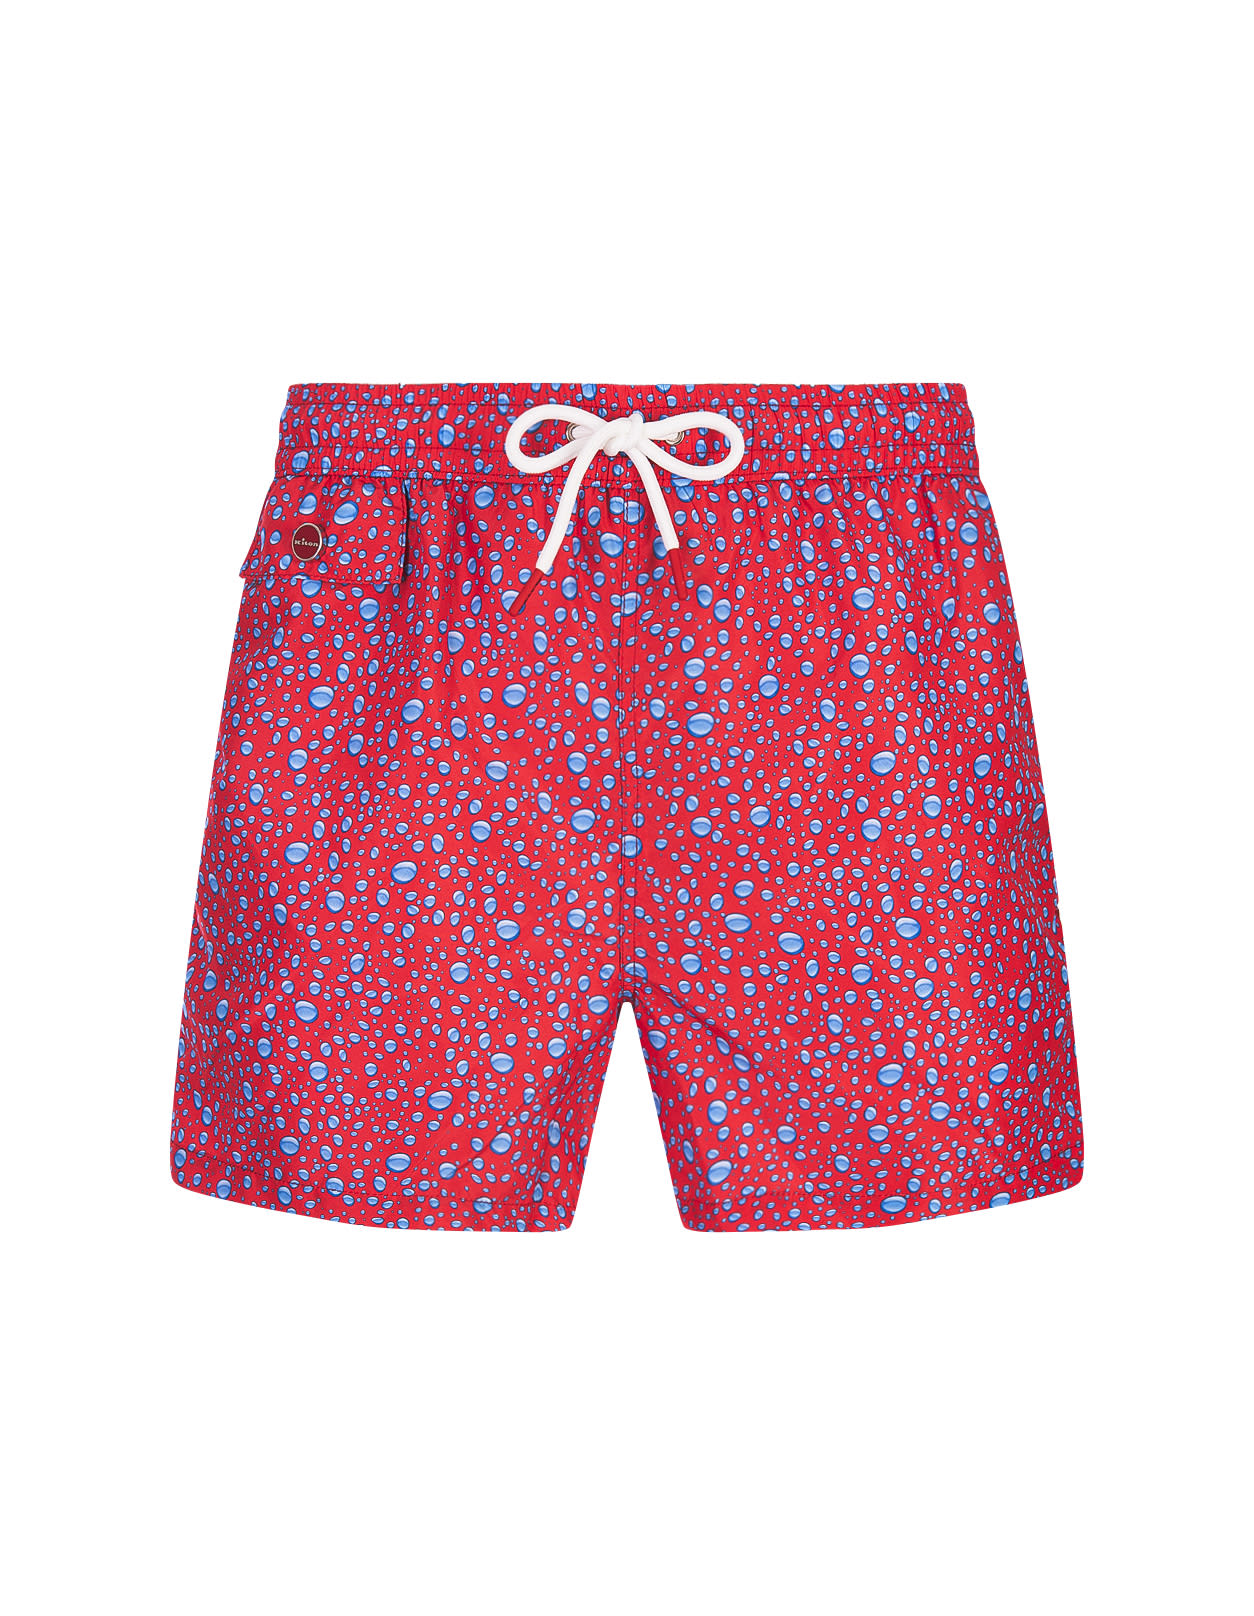 Kiton Red Swim Shorts With Water Drops Pattern